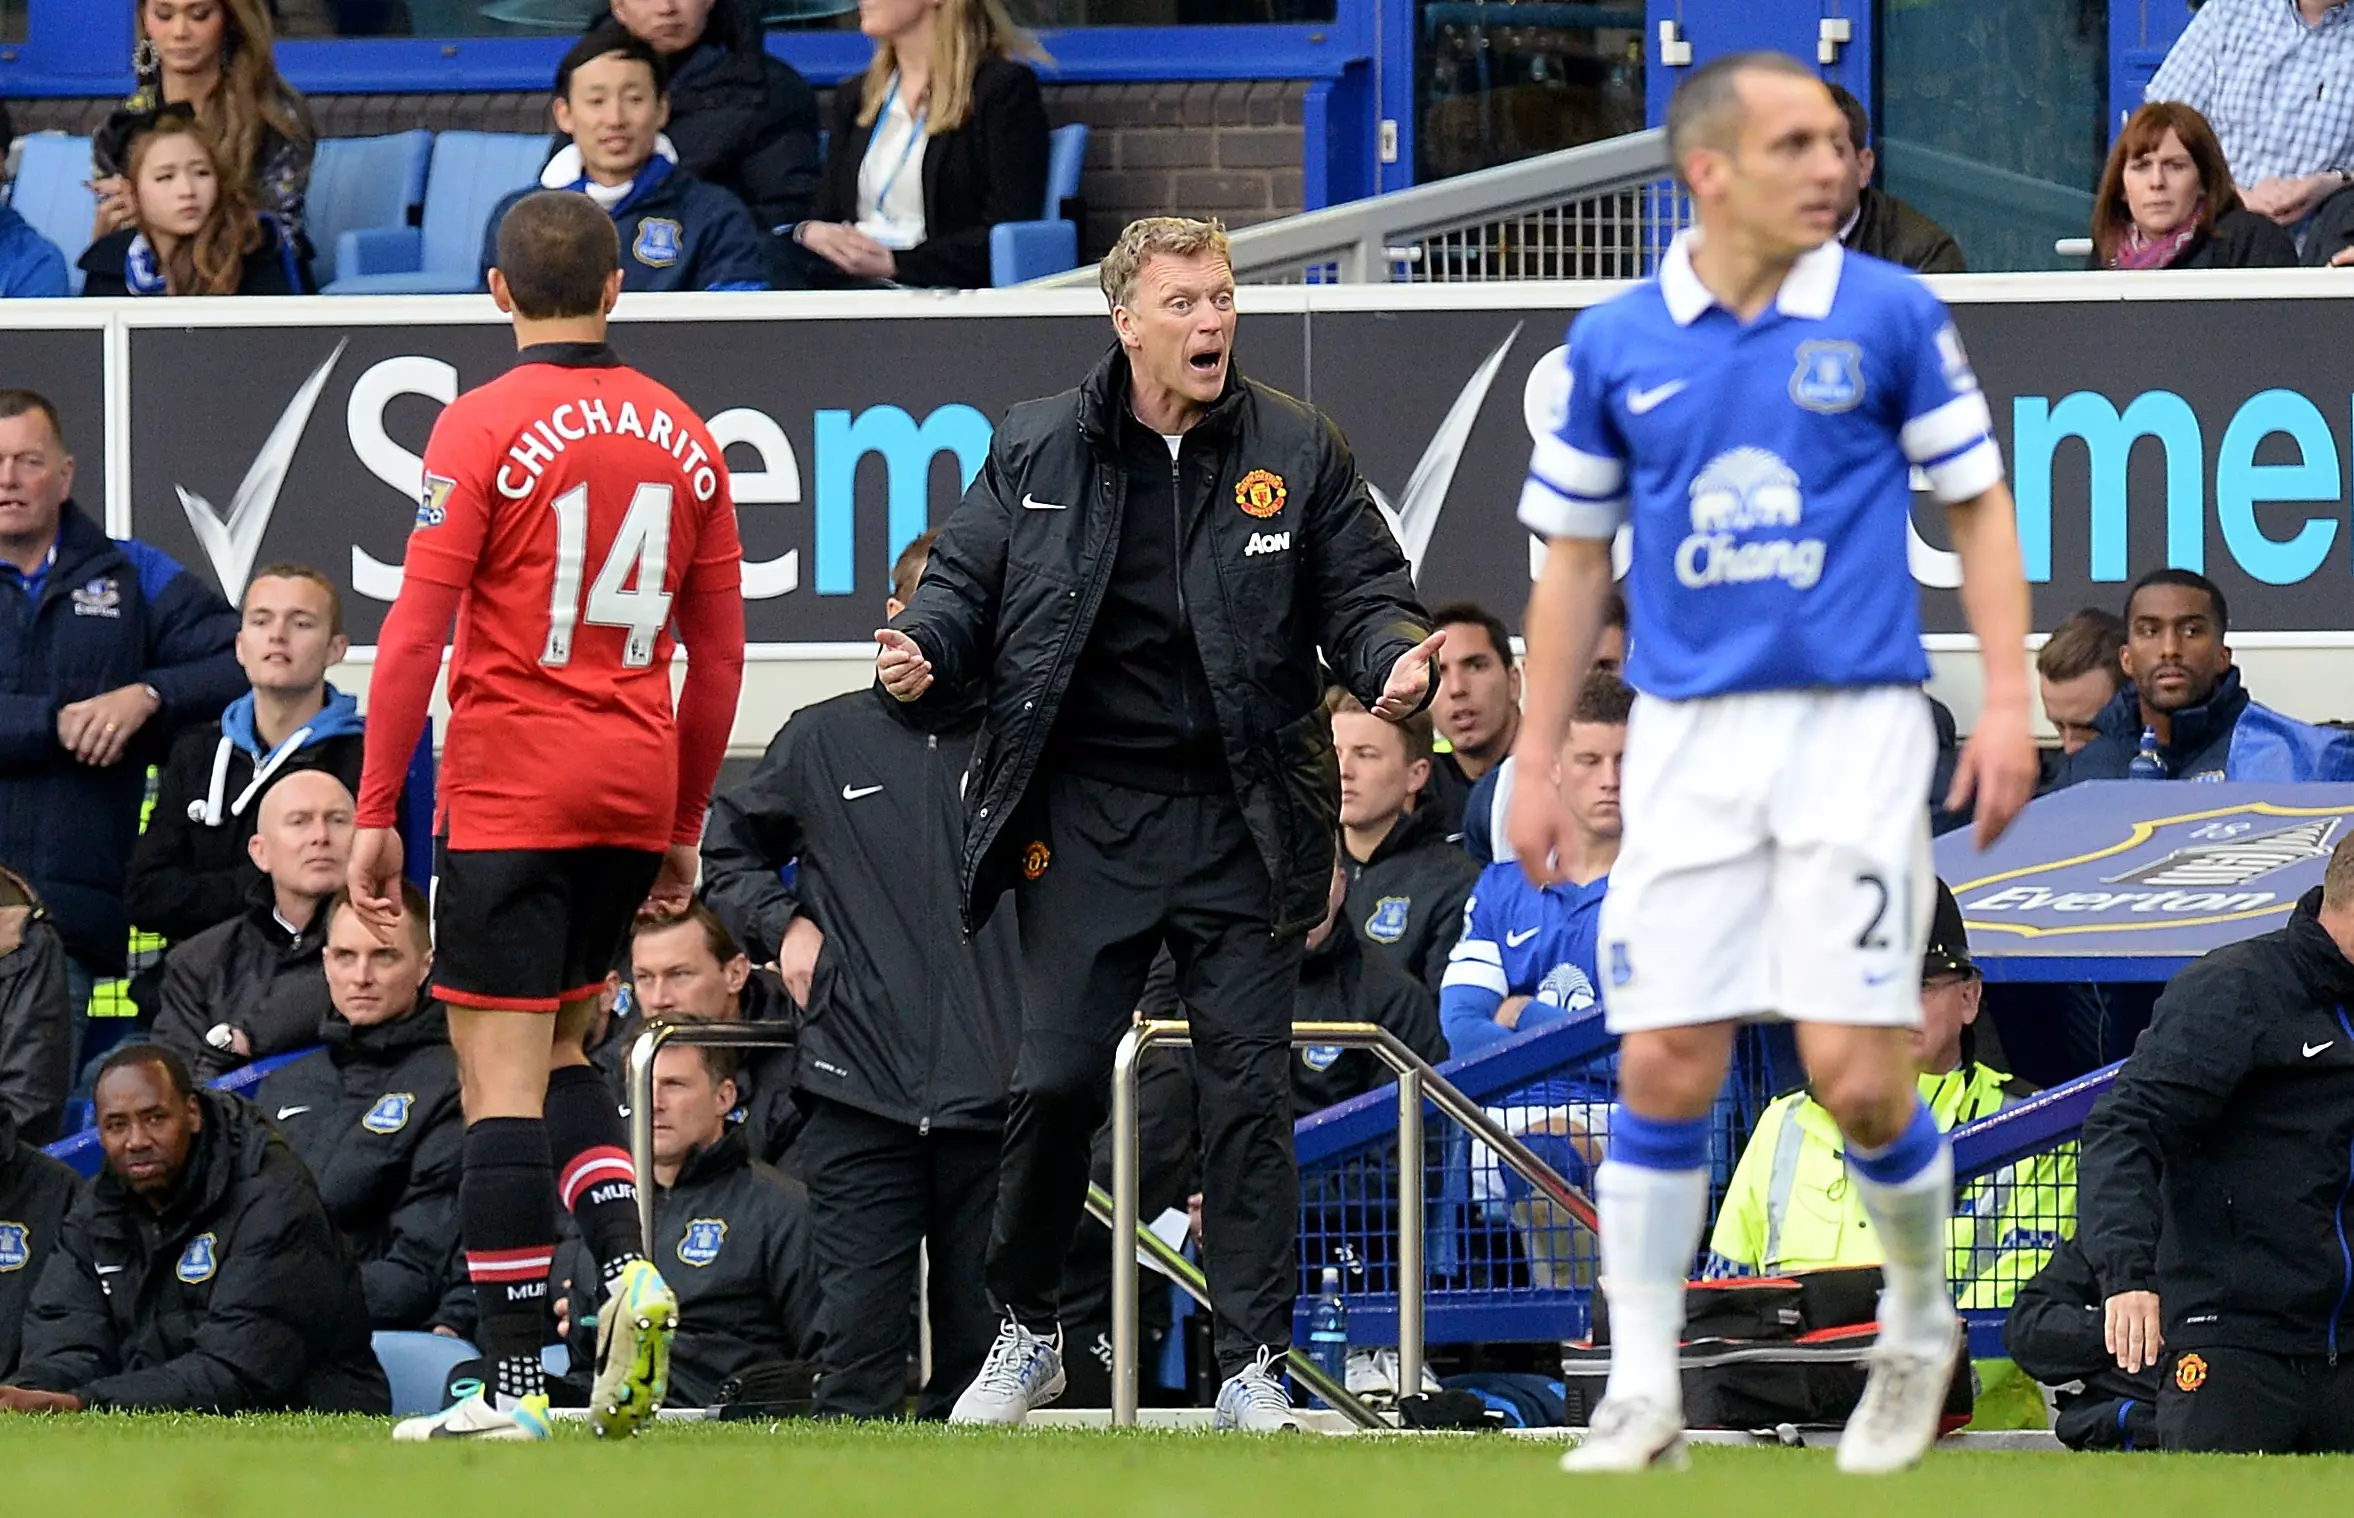 Moyes' last game in charge at United was somewhat ironically at Everton. Image: PA Images